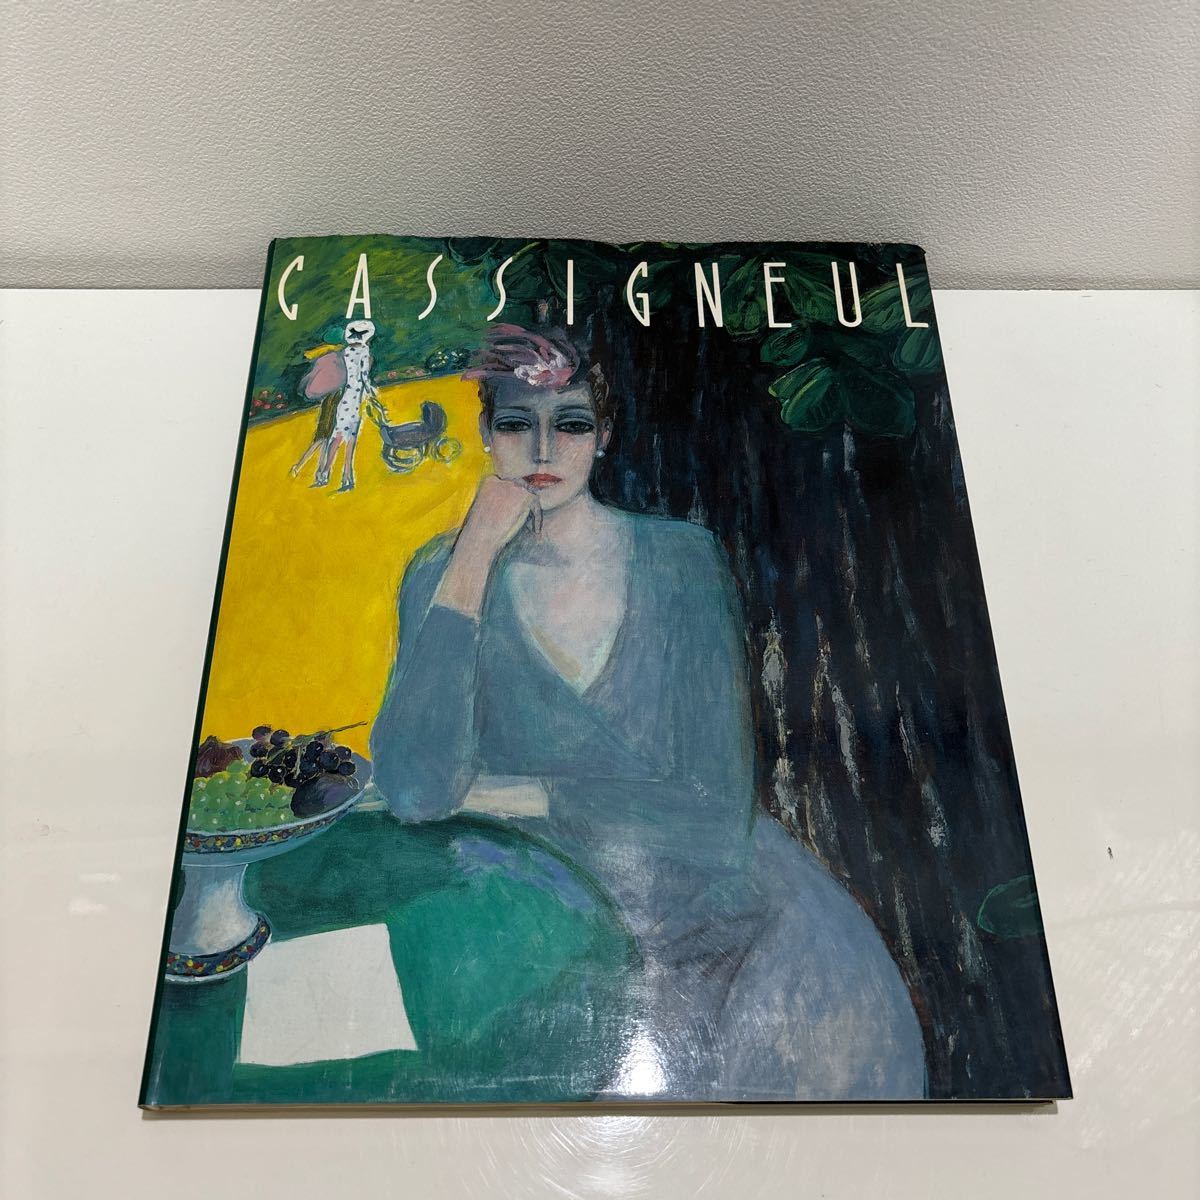 ●Catalogue● Cassignol Exhibition: Feast of Flowers and Women 1990 Asahi Shimbun Cultural Planning Bureau Osaka Planning Department/Oil painting/Drawing/Tapisserie/Plate/Collection of works/Painting/Art book ★190, Painting, Art Book, Collection, Catalog